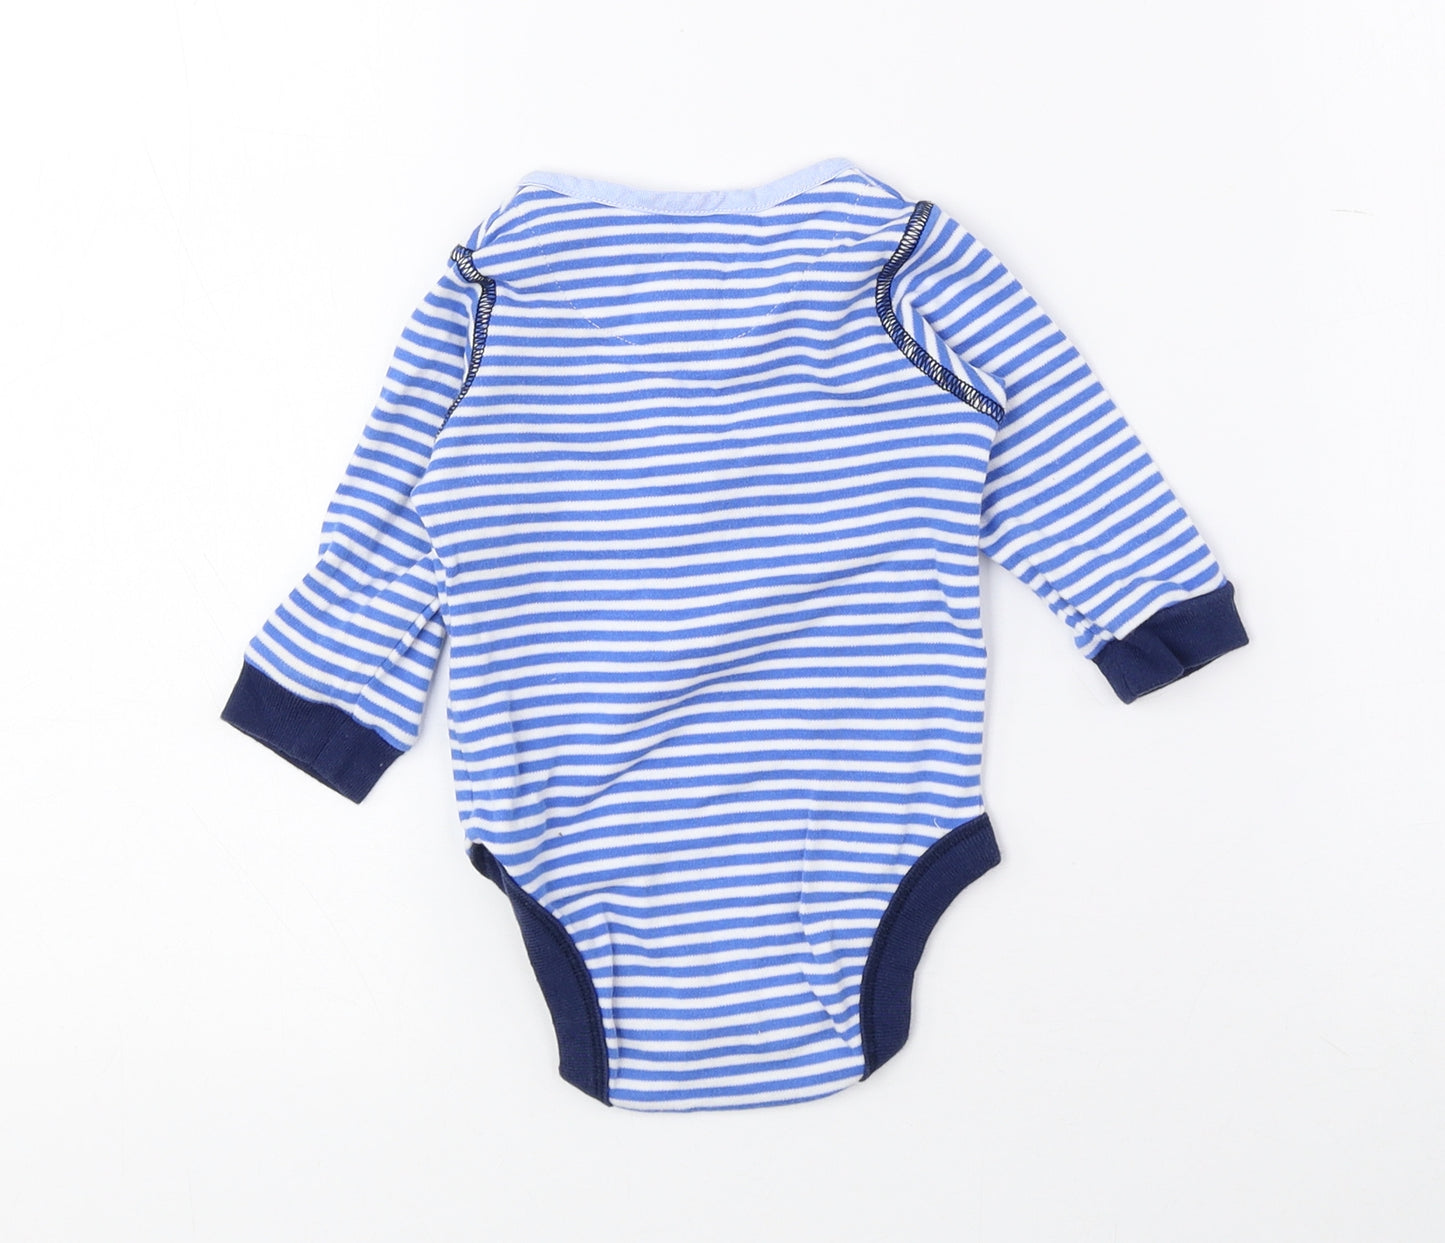 Marks and Spencer Boys Blue Striped 100% Cotton Babygrow One-Piece Size 3-6 Months Snap